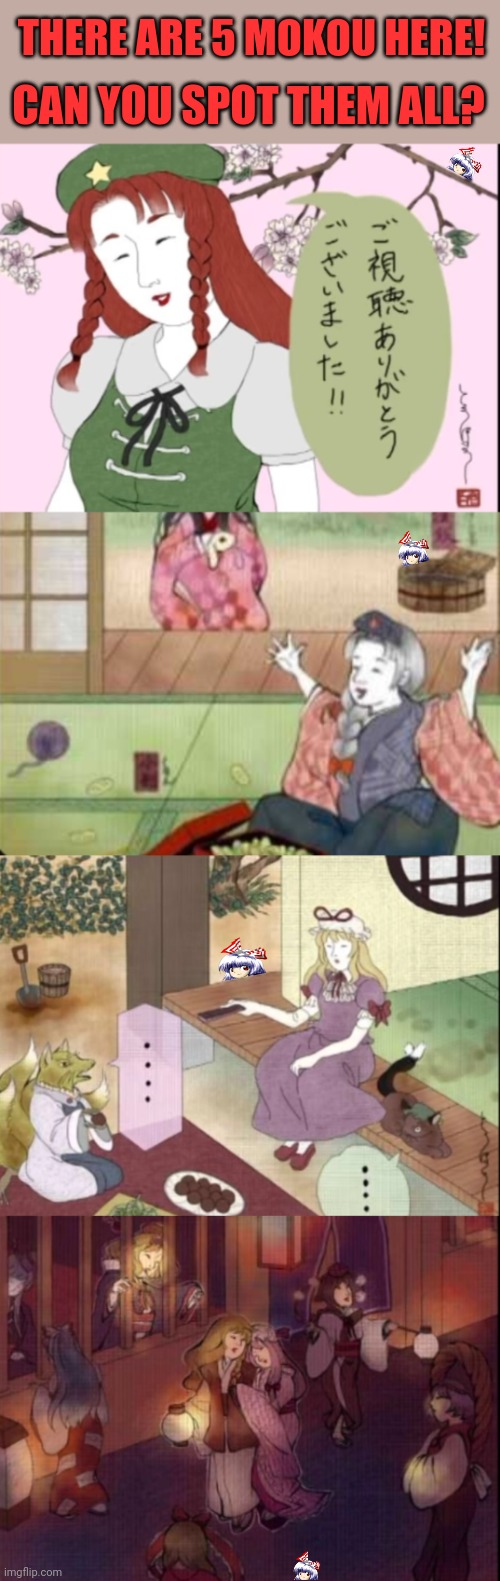 THERE ARE 5 MOKOU HERE! CAN YOU SPOT THEM ALL? | image tagged in memes,mokou,spot | made w/ Imgflip meme maker